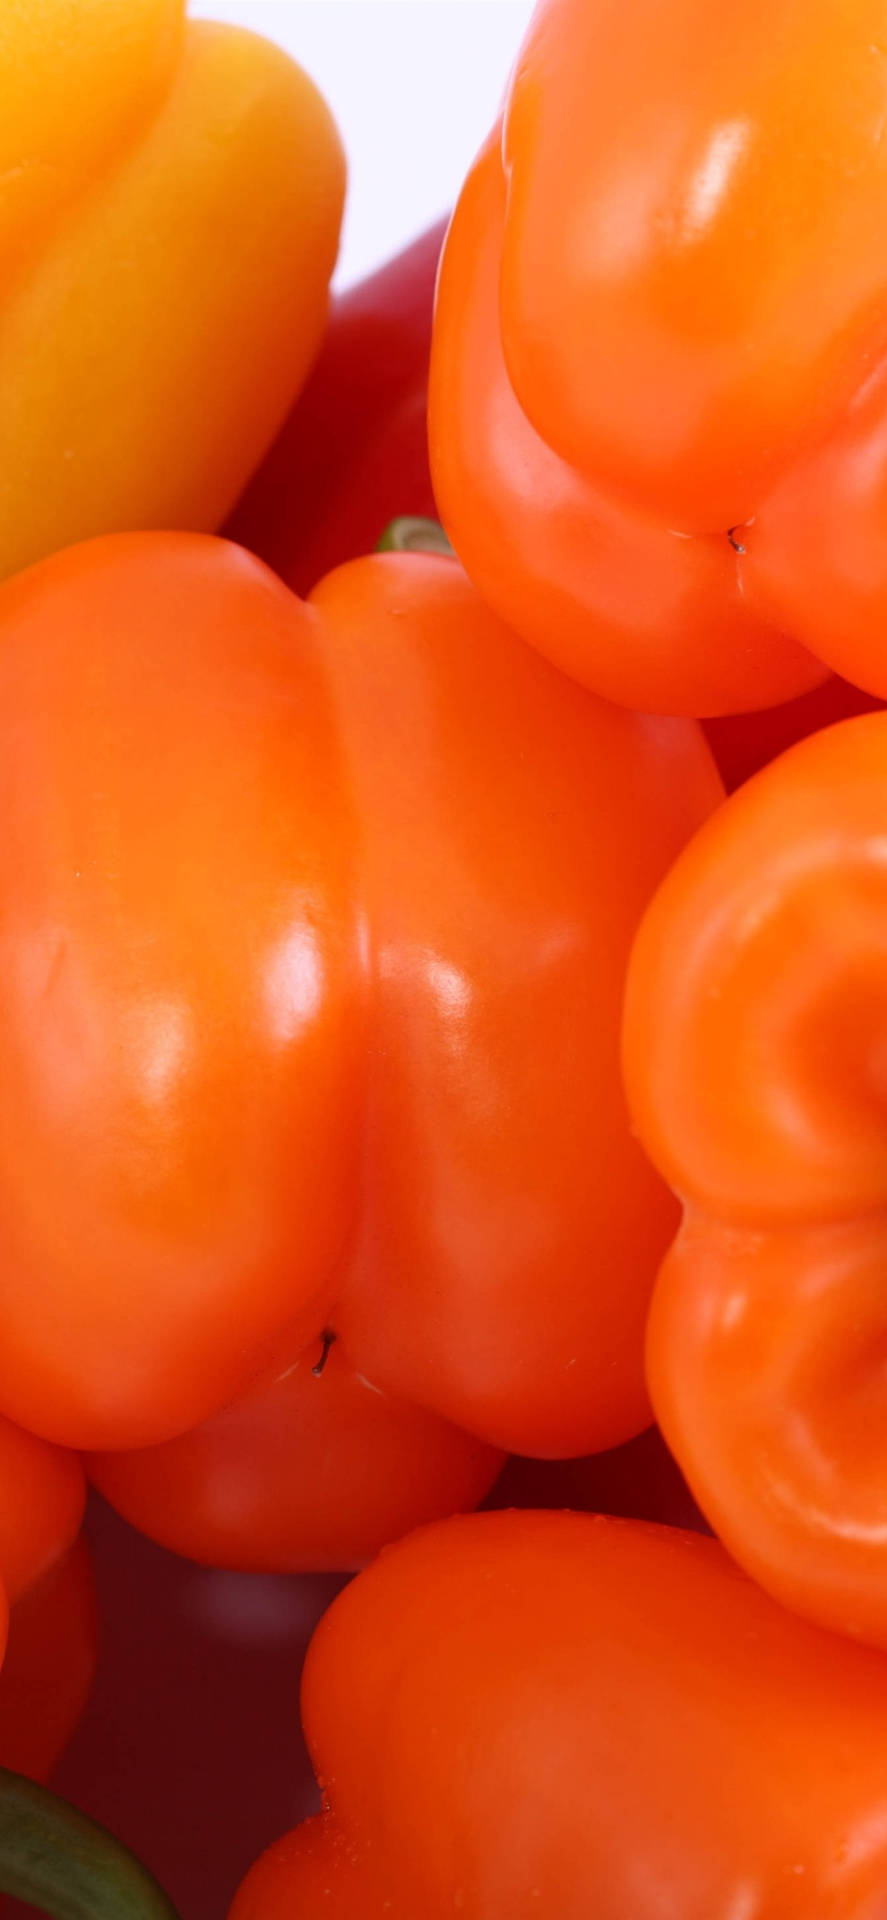 Smooth Orange Bell Peppers Wallpaper